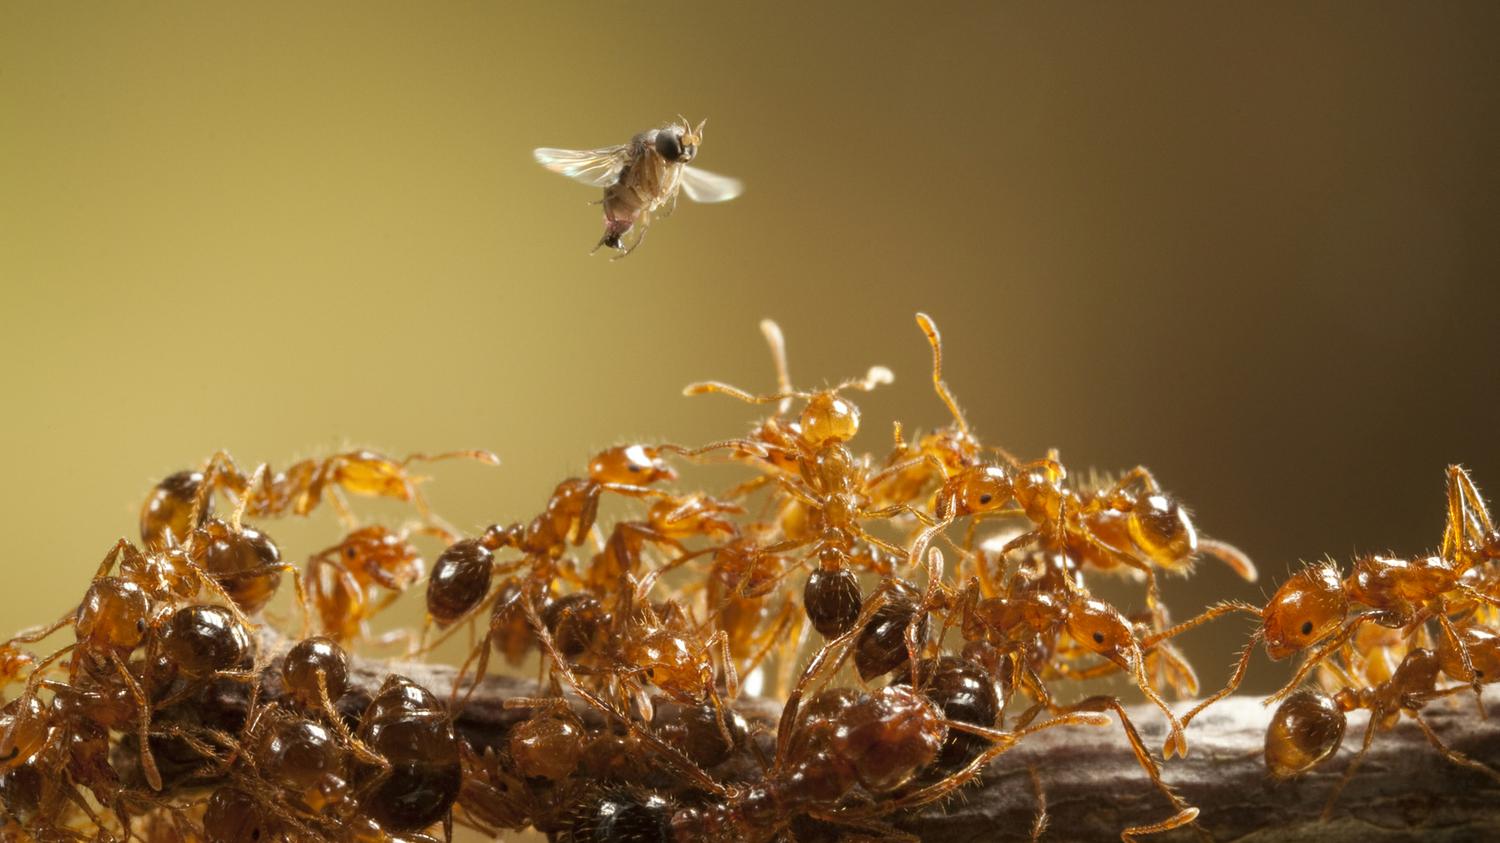 All-out war against fellow members of the same species occurs only among large societies of humans and ants.